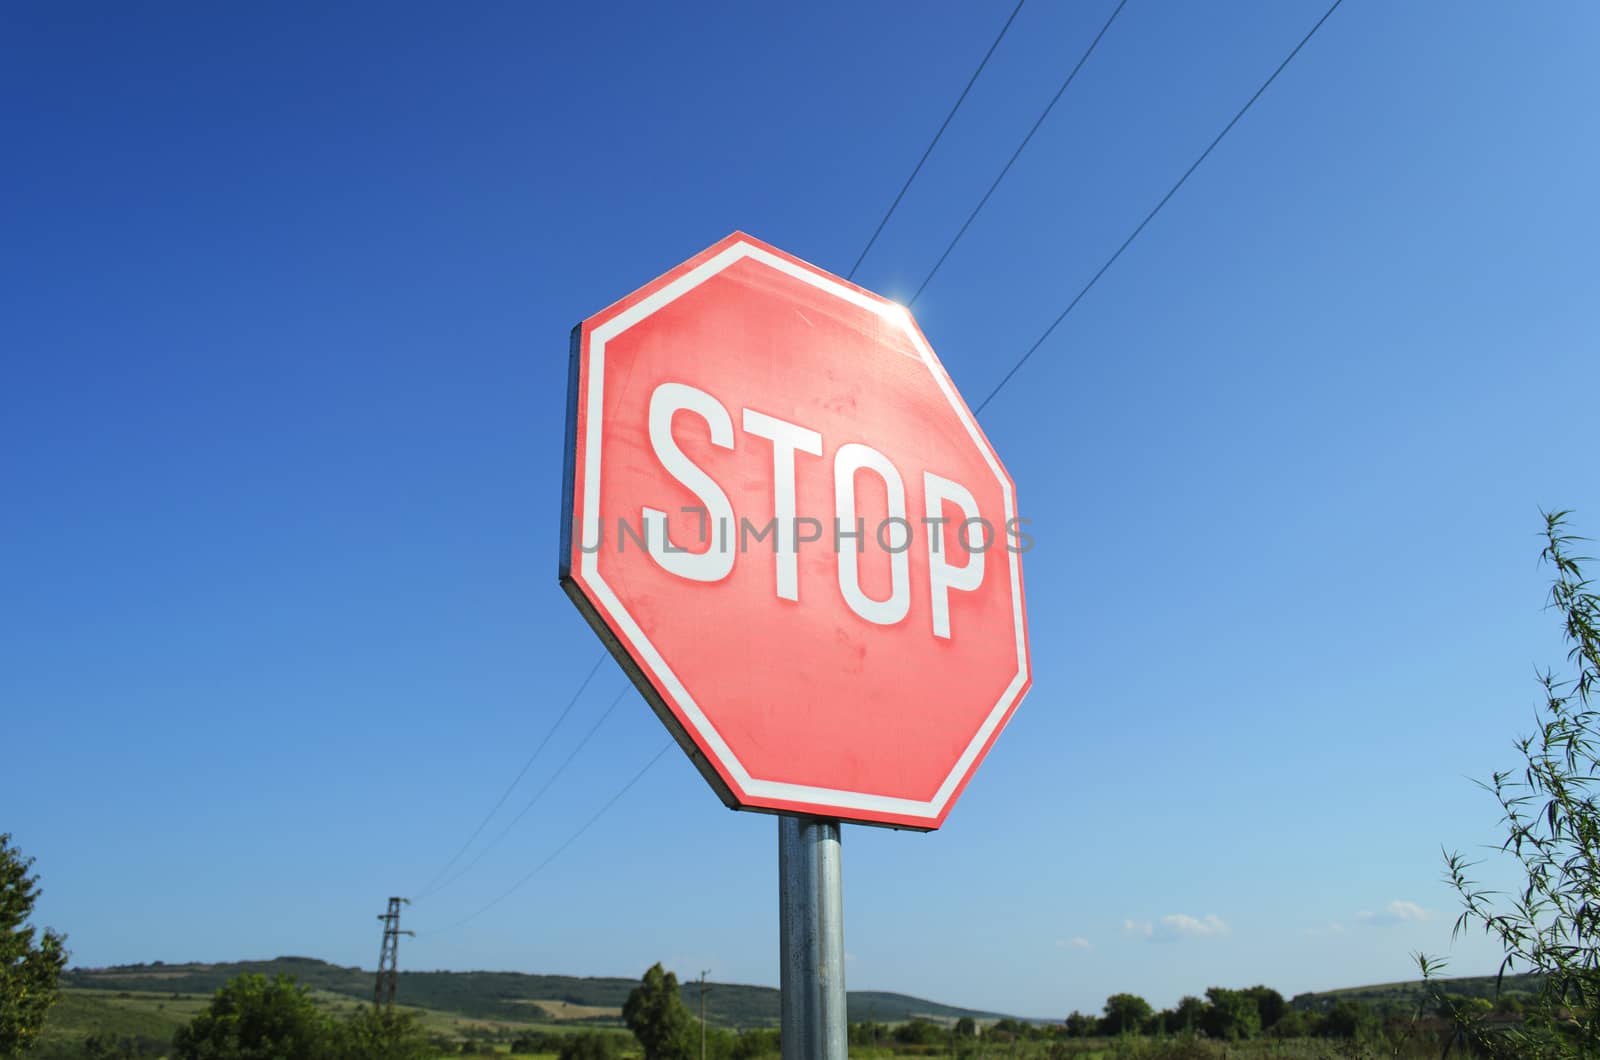 Stop sign in country road